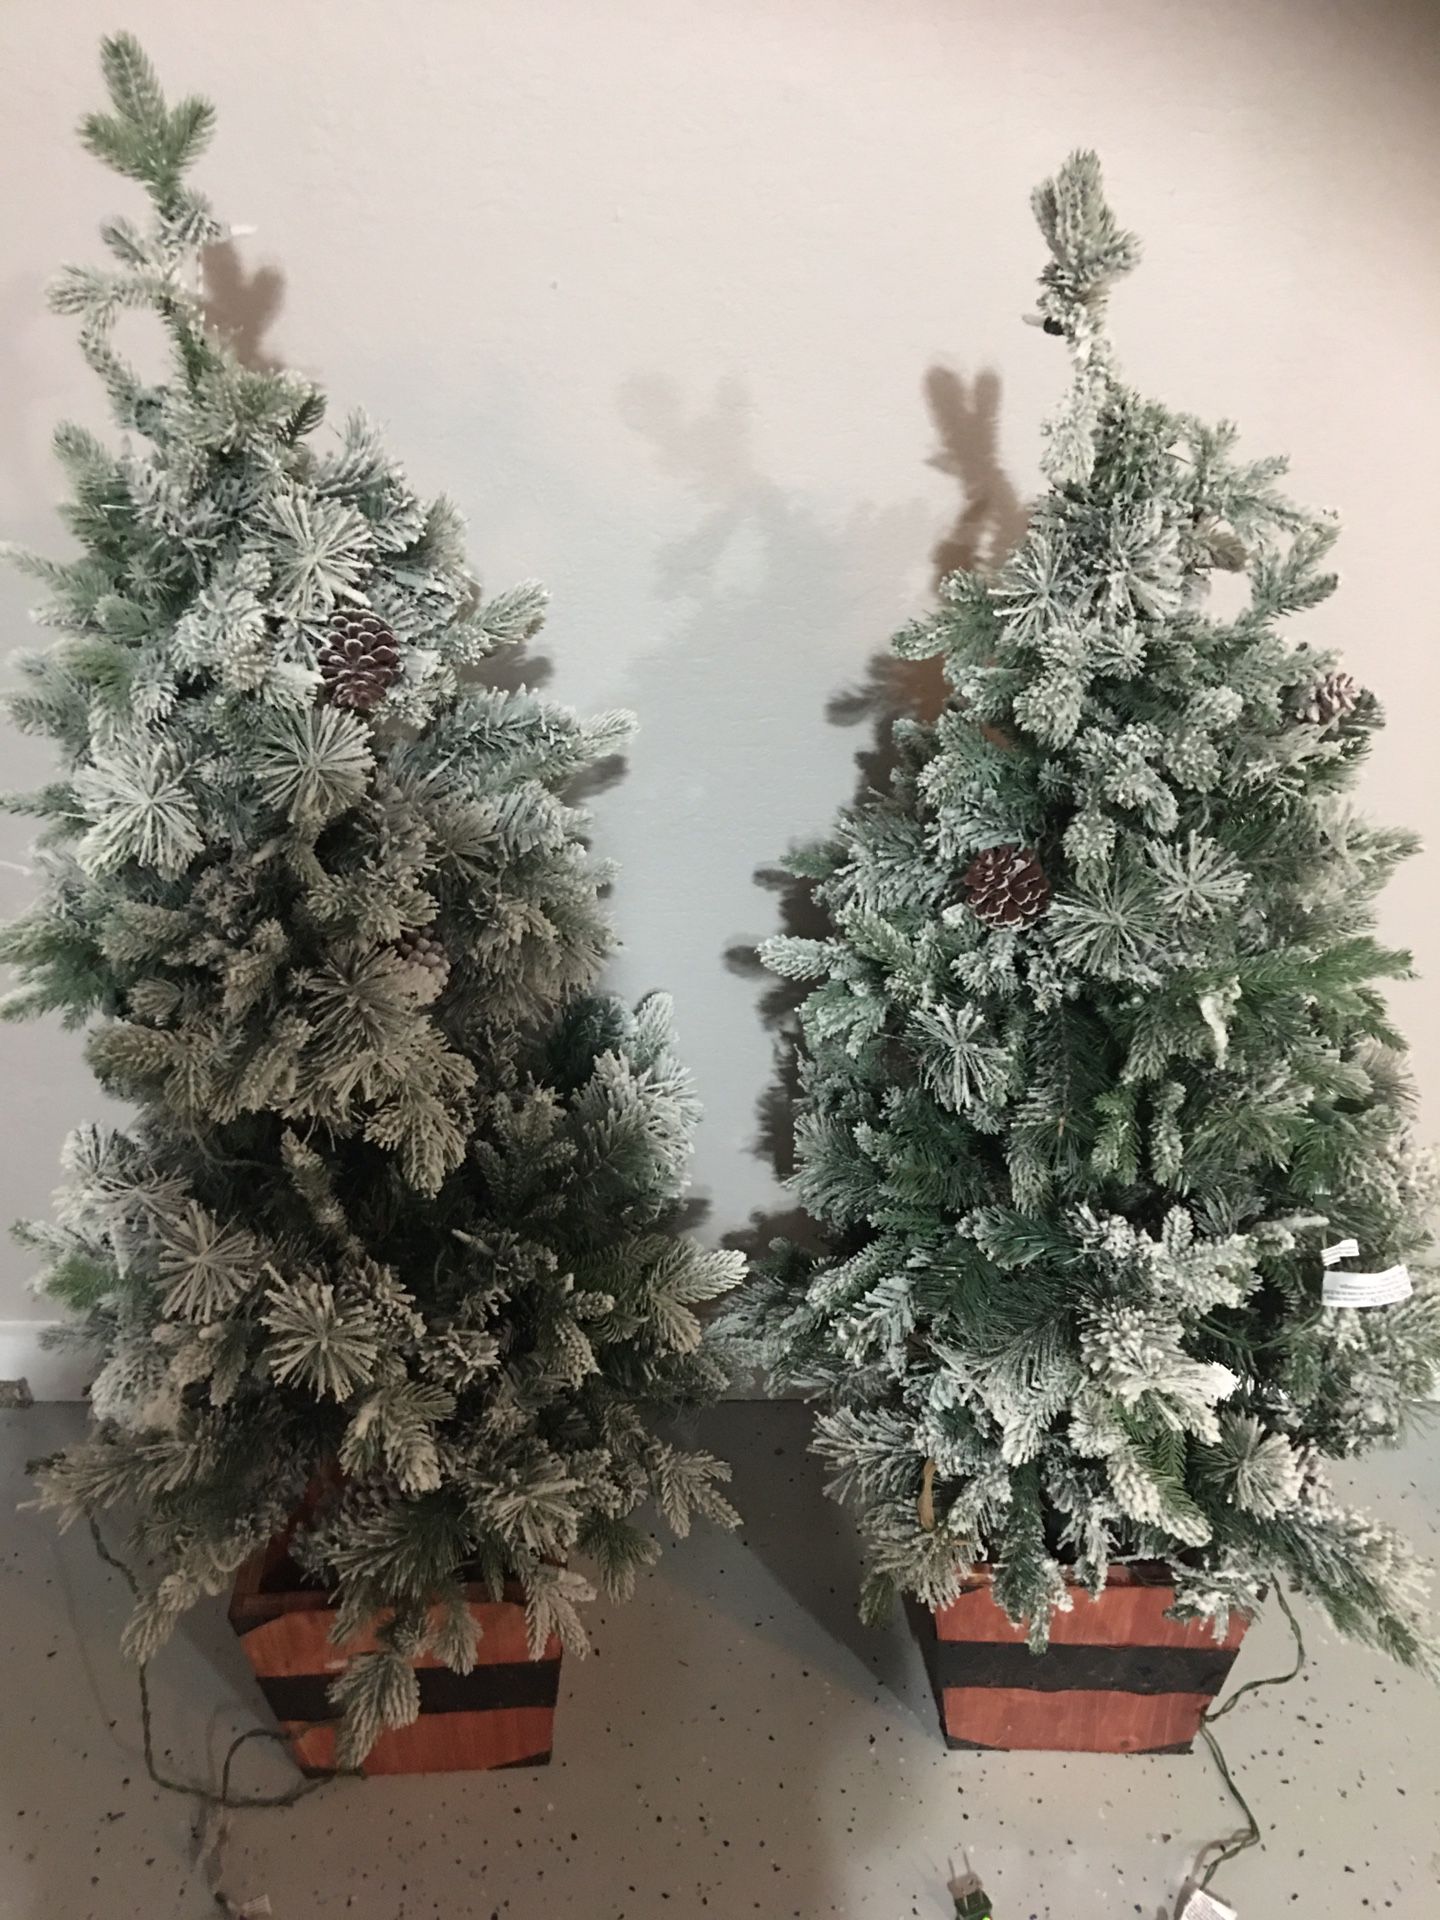 2 Christmas trees with lights and snow